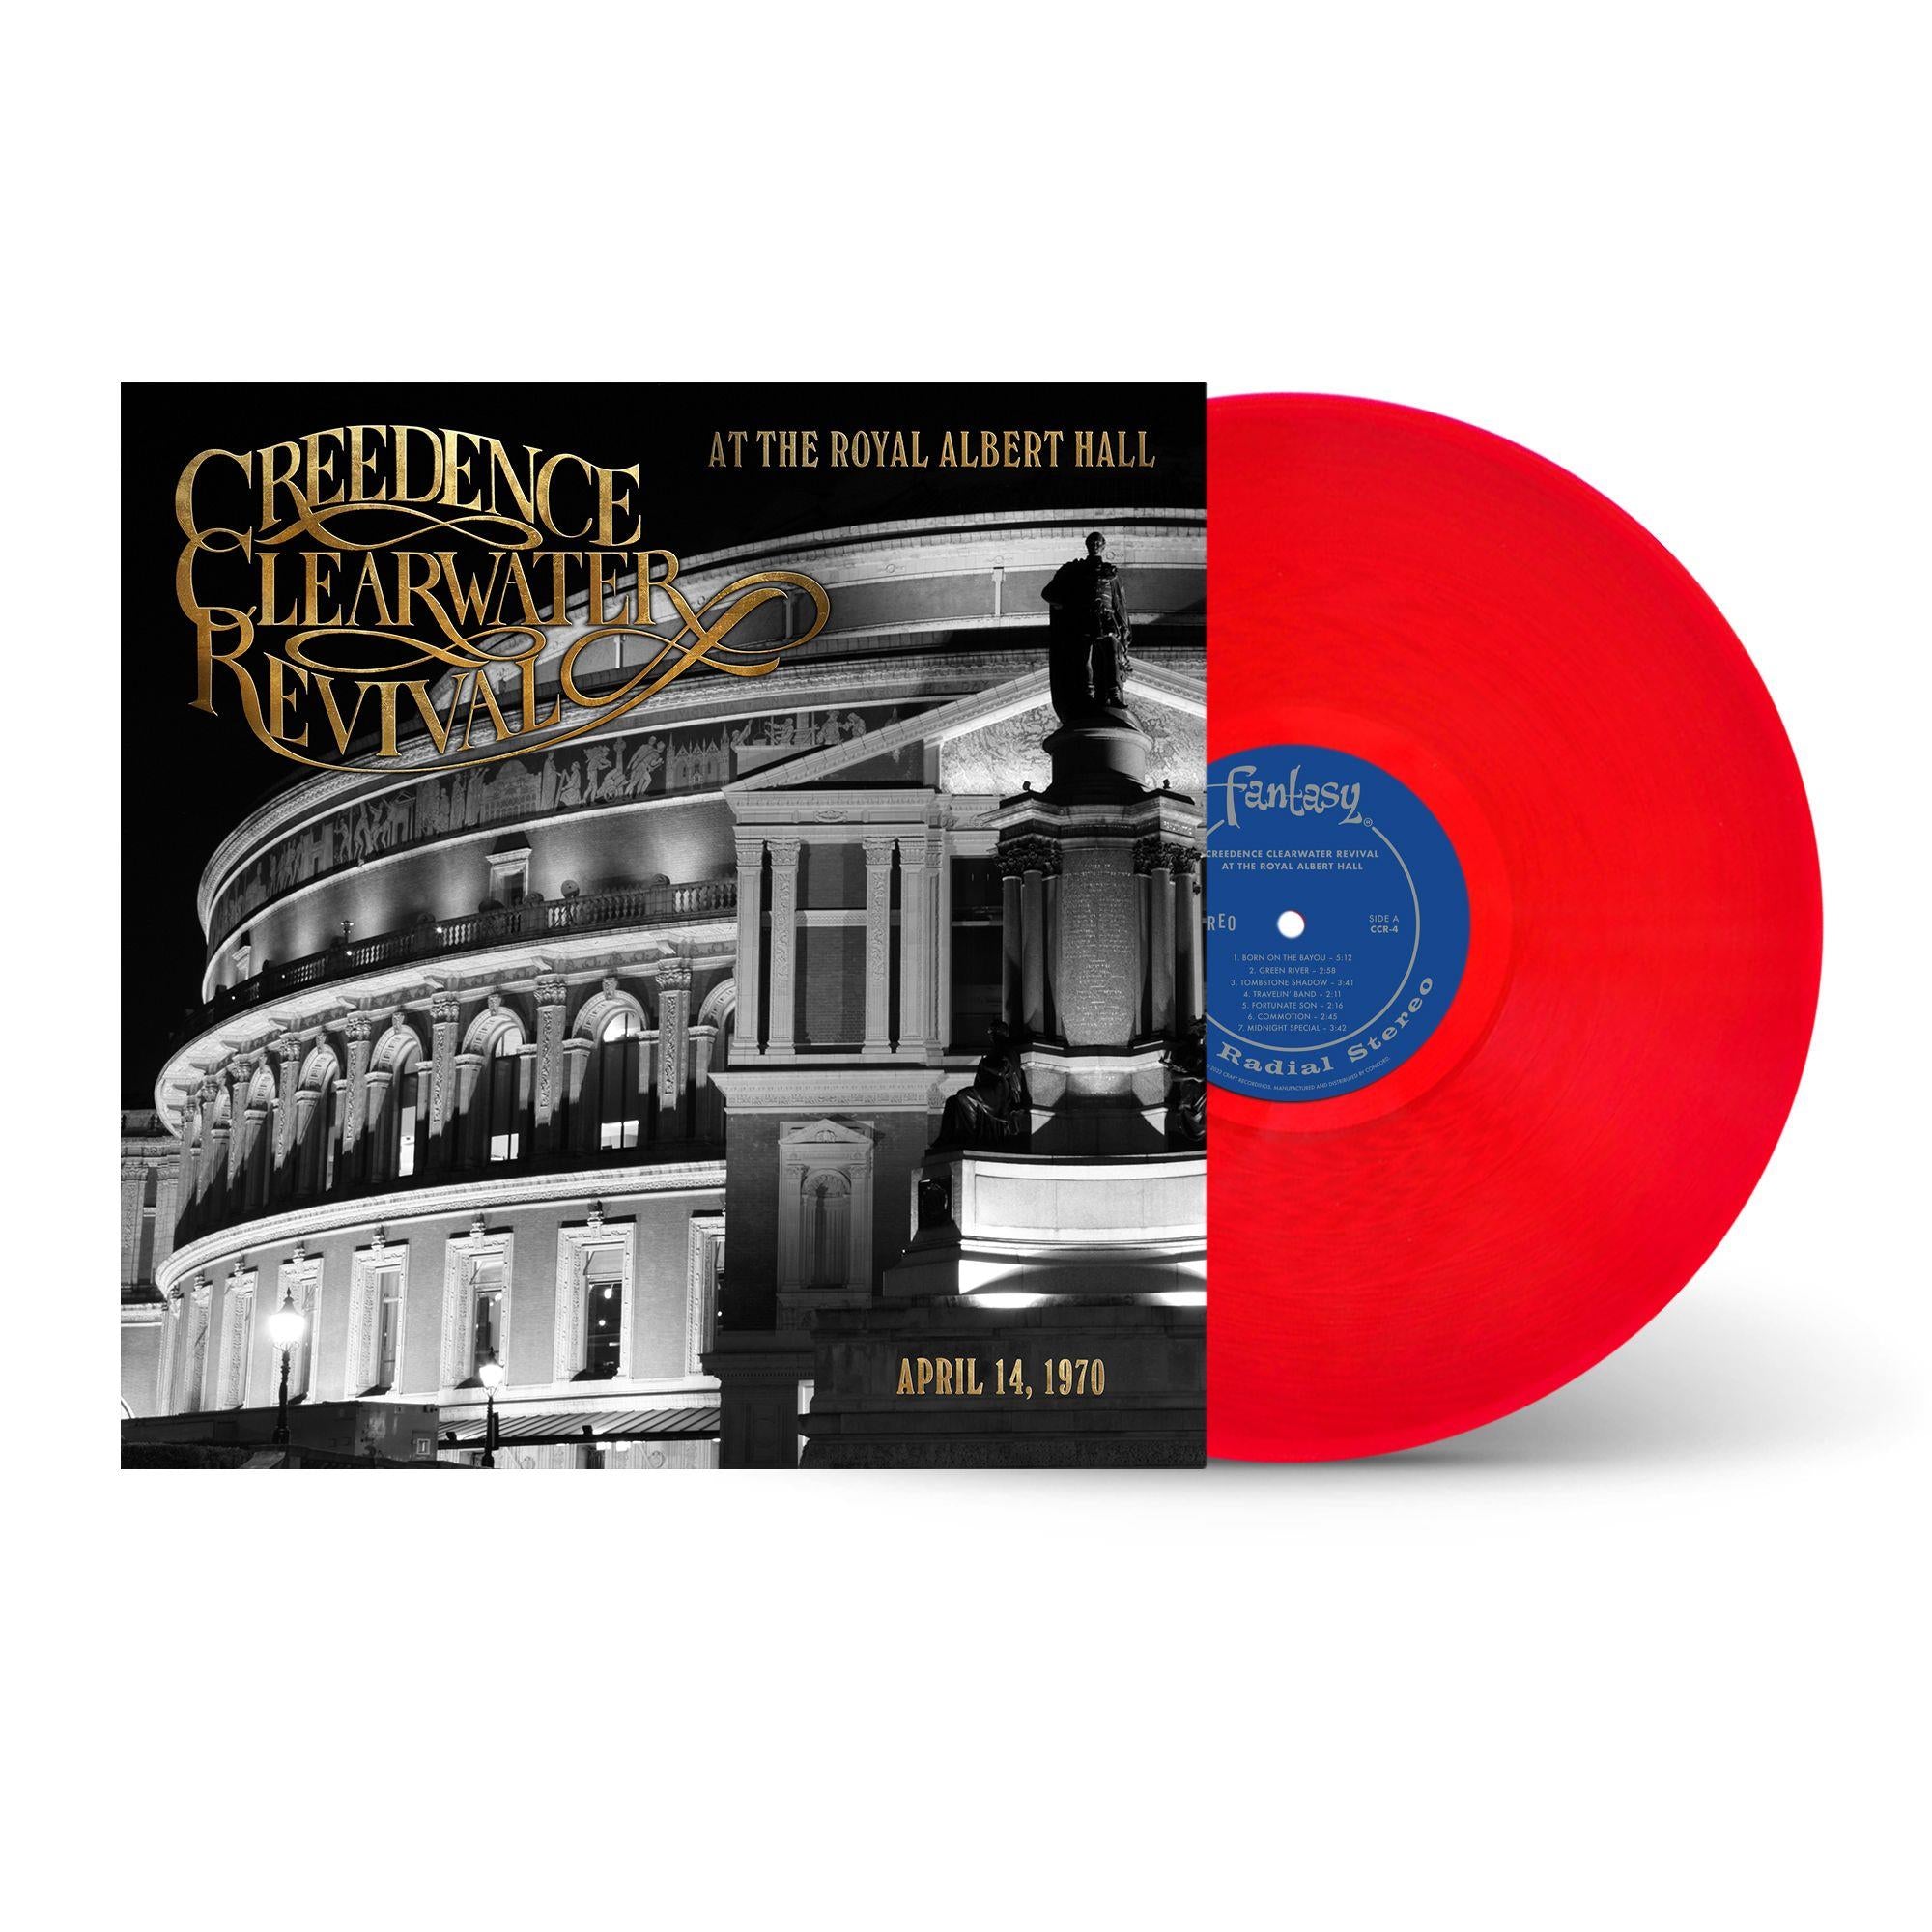 Creedence Clearwater Revival - at The Royal Albert Hall [Vinyl]